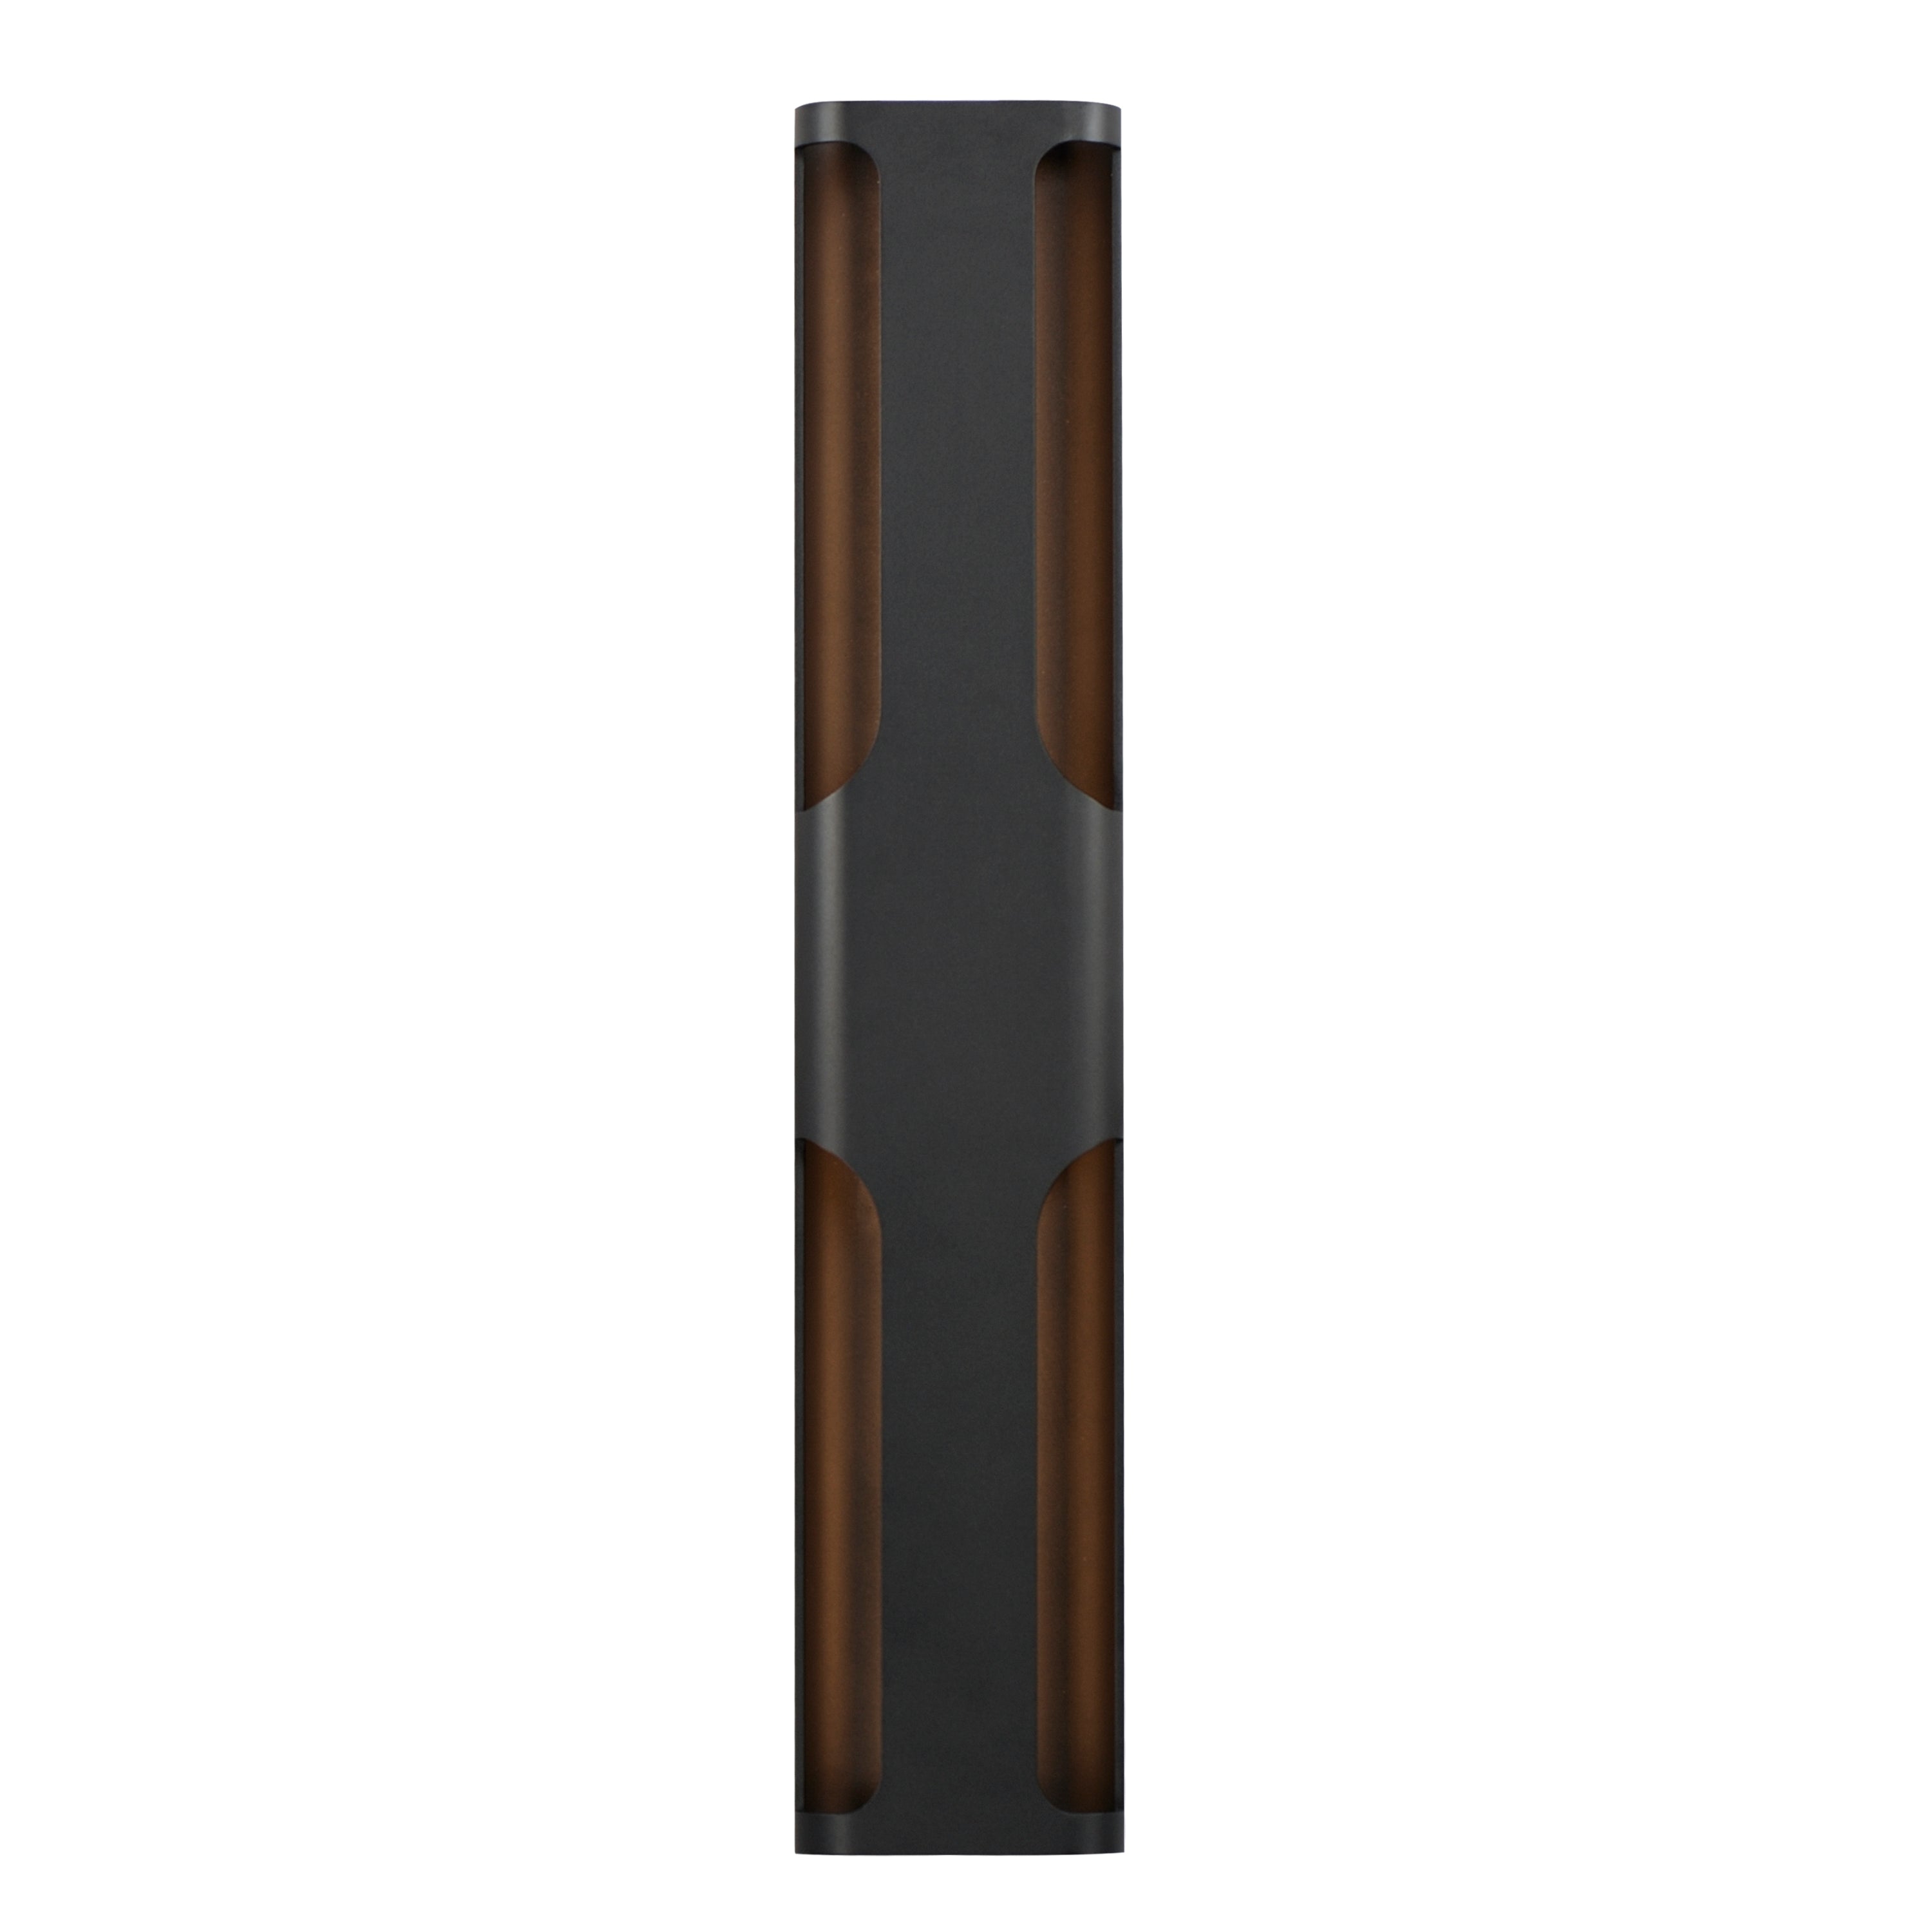 Maglev-Outdoor Wall Mount Outdoor l Wall ET2 x6.25x33.5 Black 